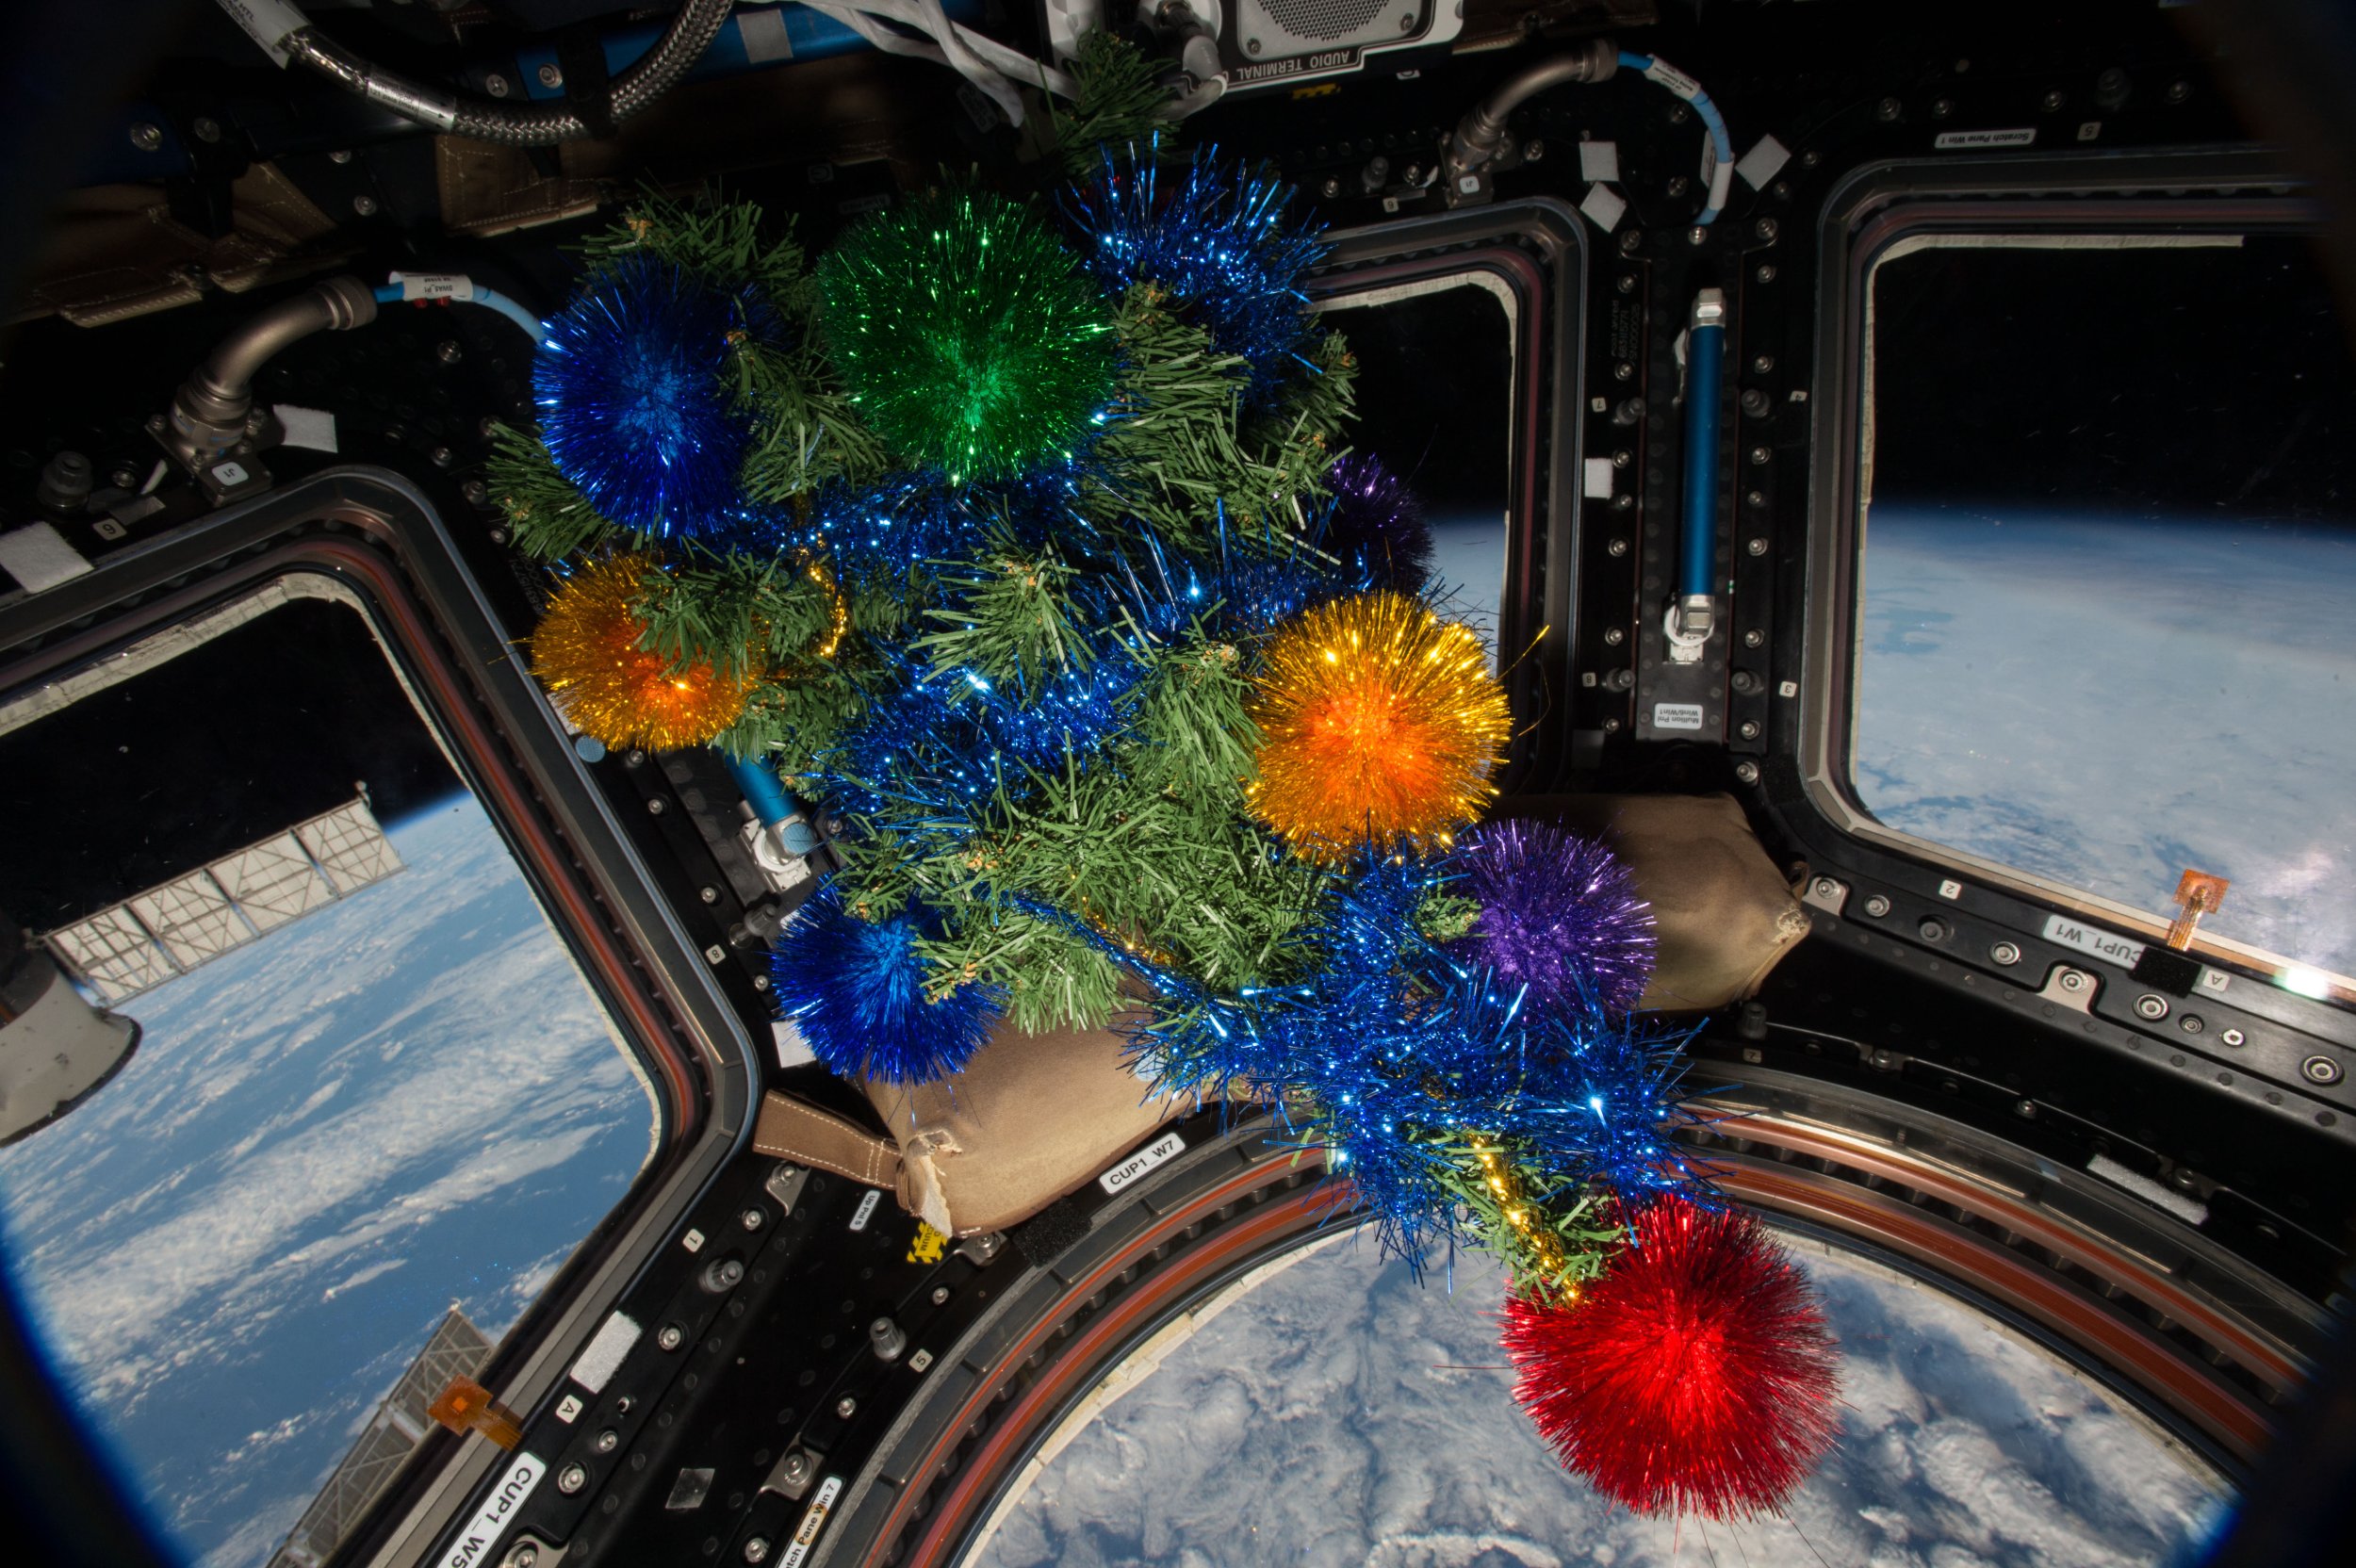 7 Photos Of The International Space Station Decorated For Christmas